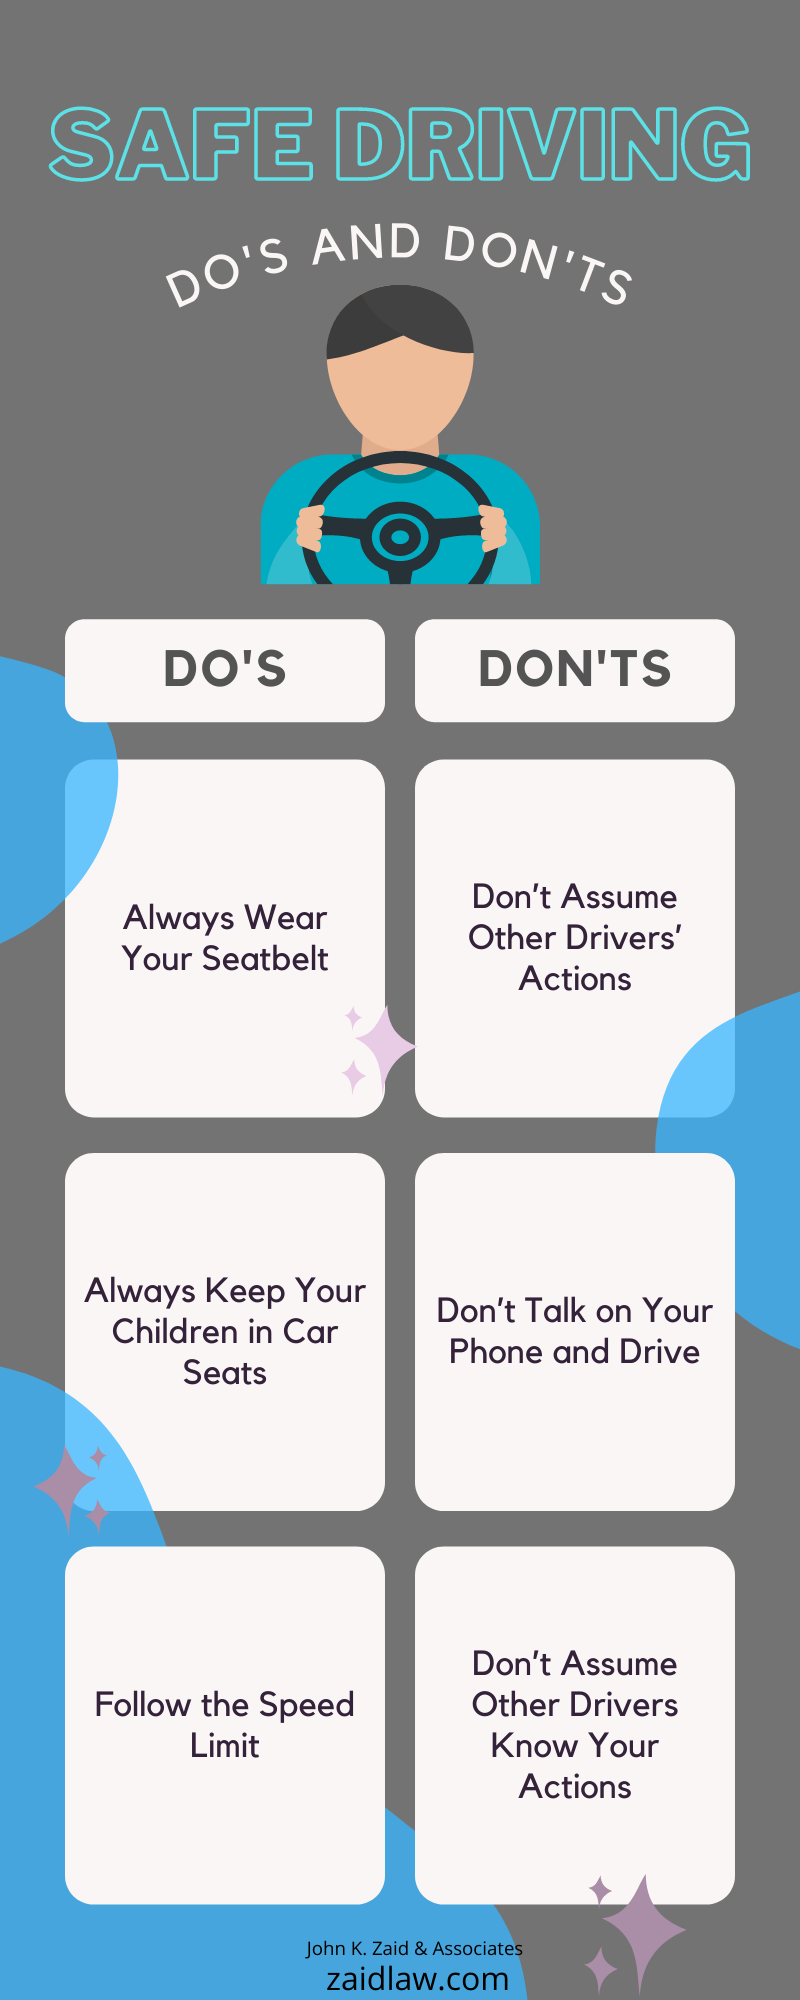 Do’s and Don’ts of Safe Driving Infographic